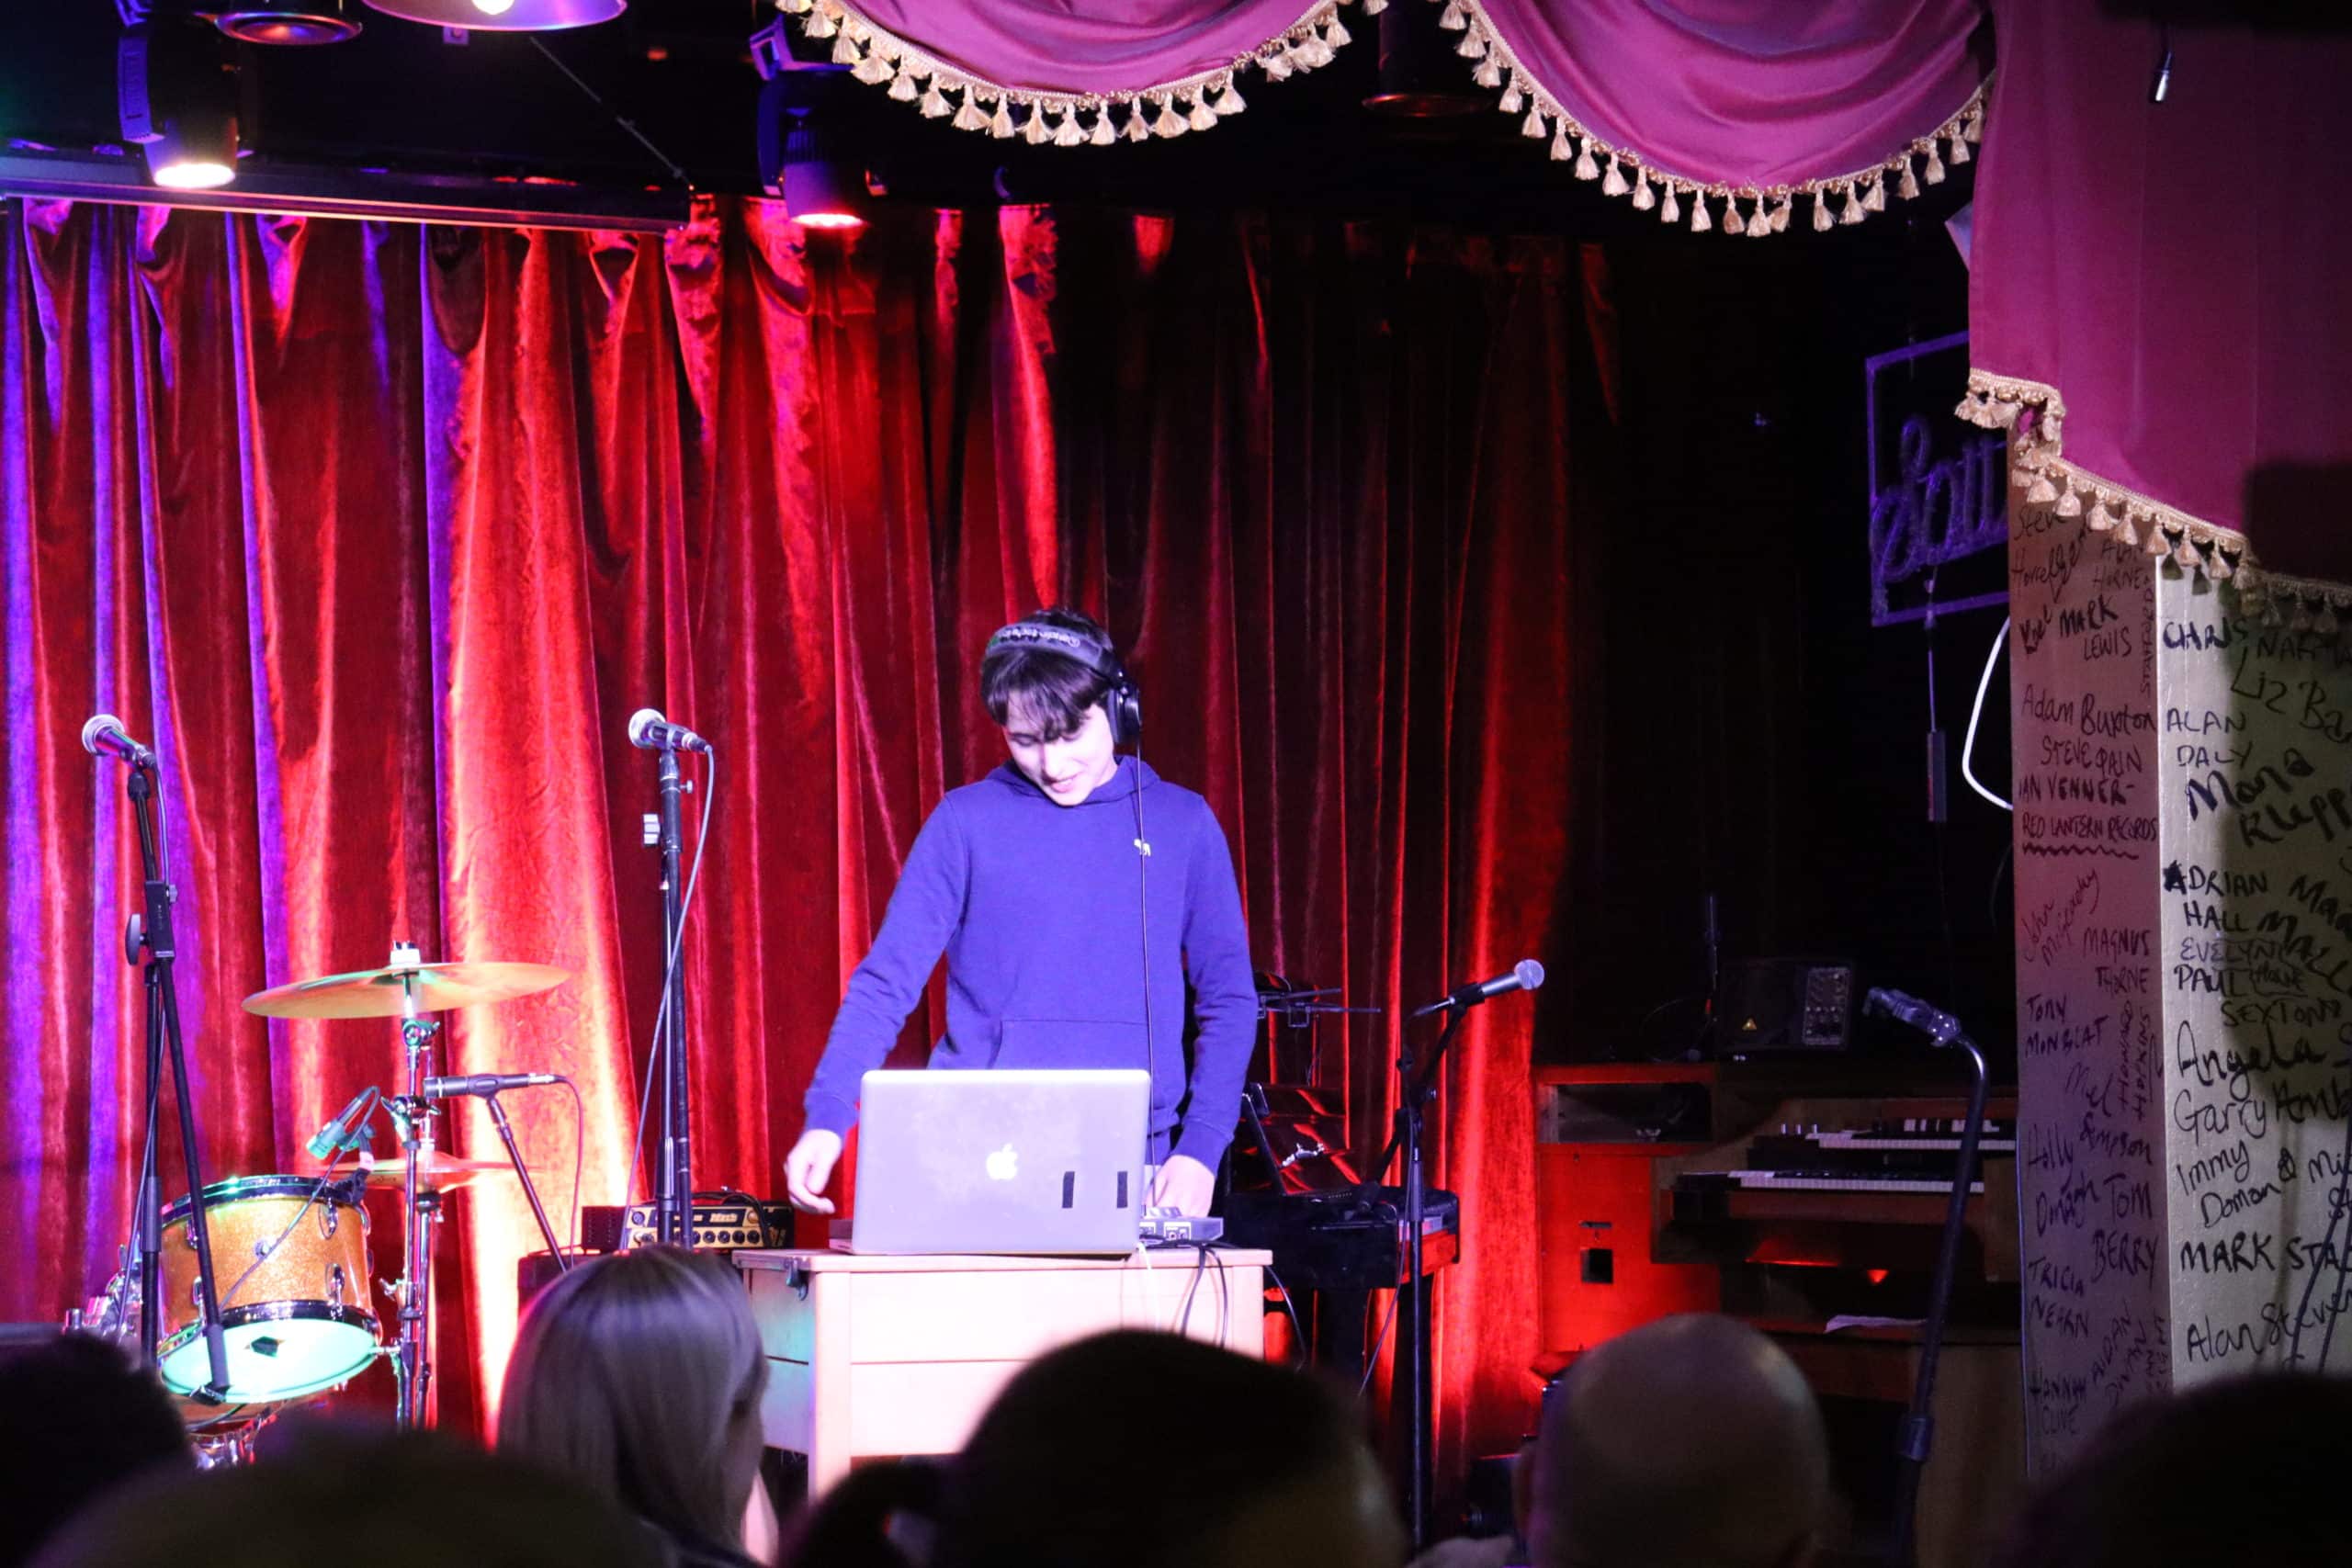 A teenager performs a DJ set with a laptop on stage